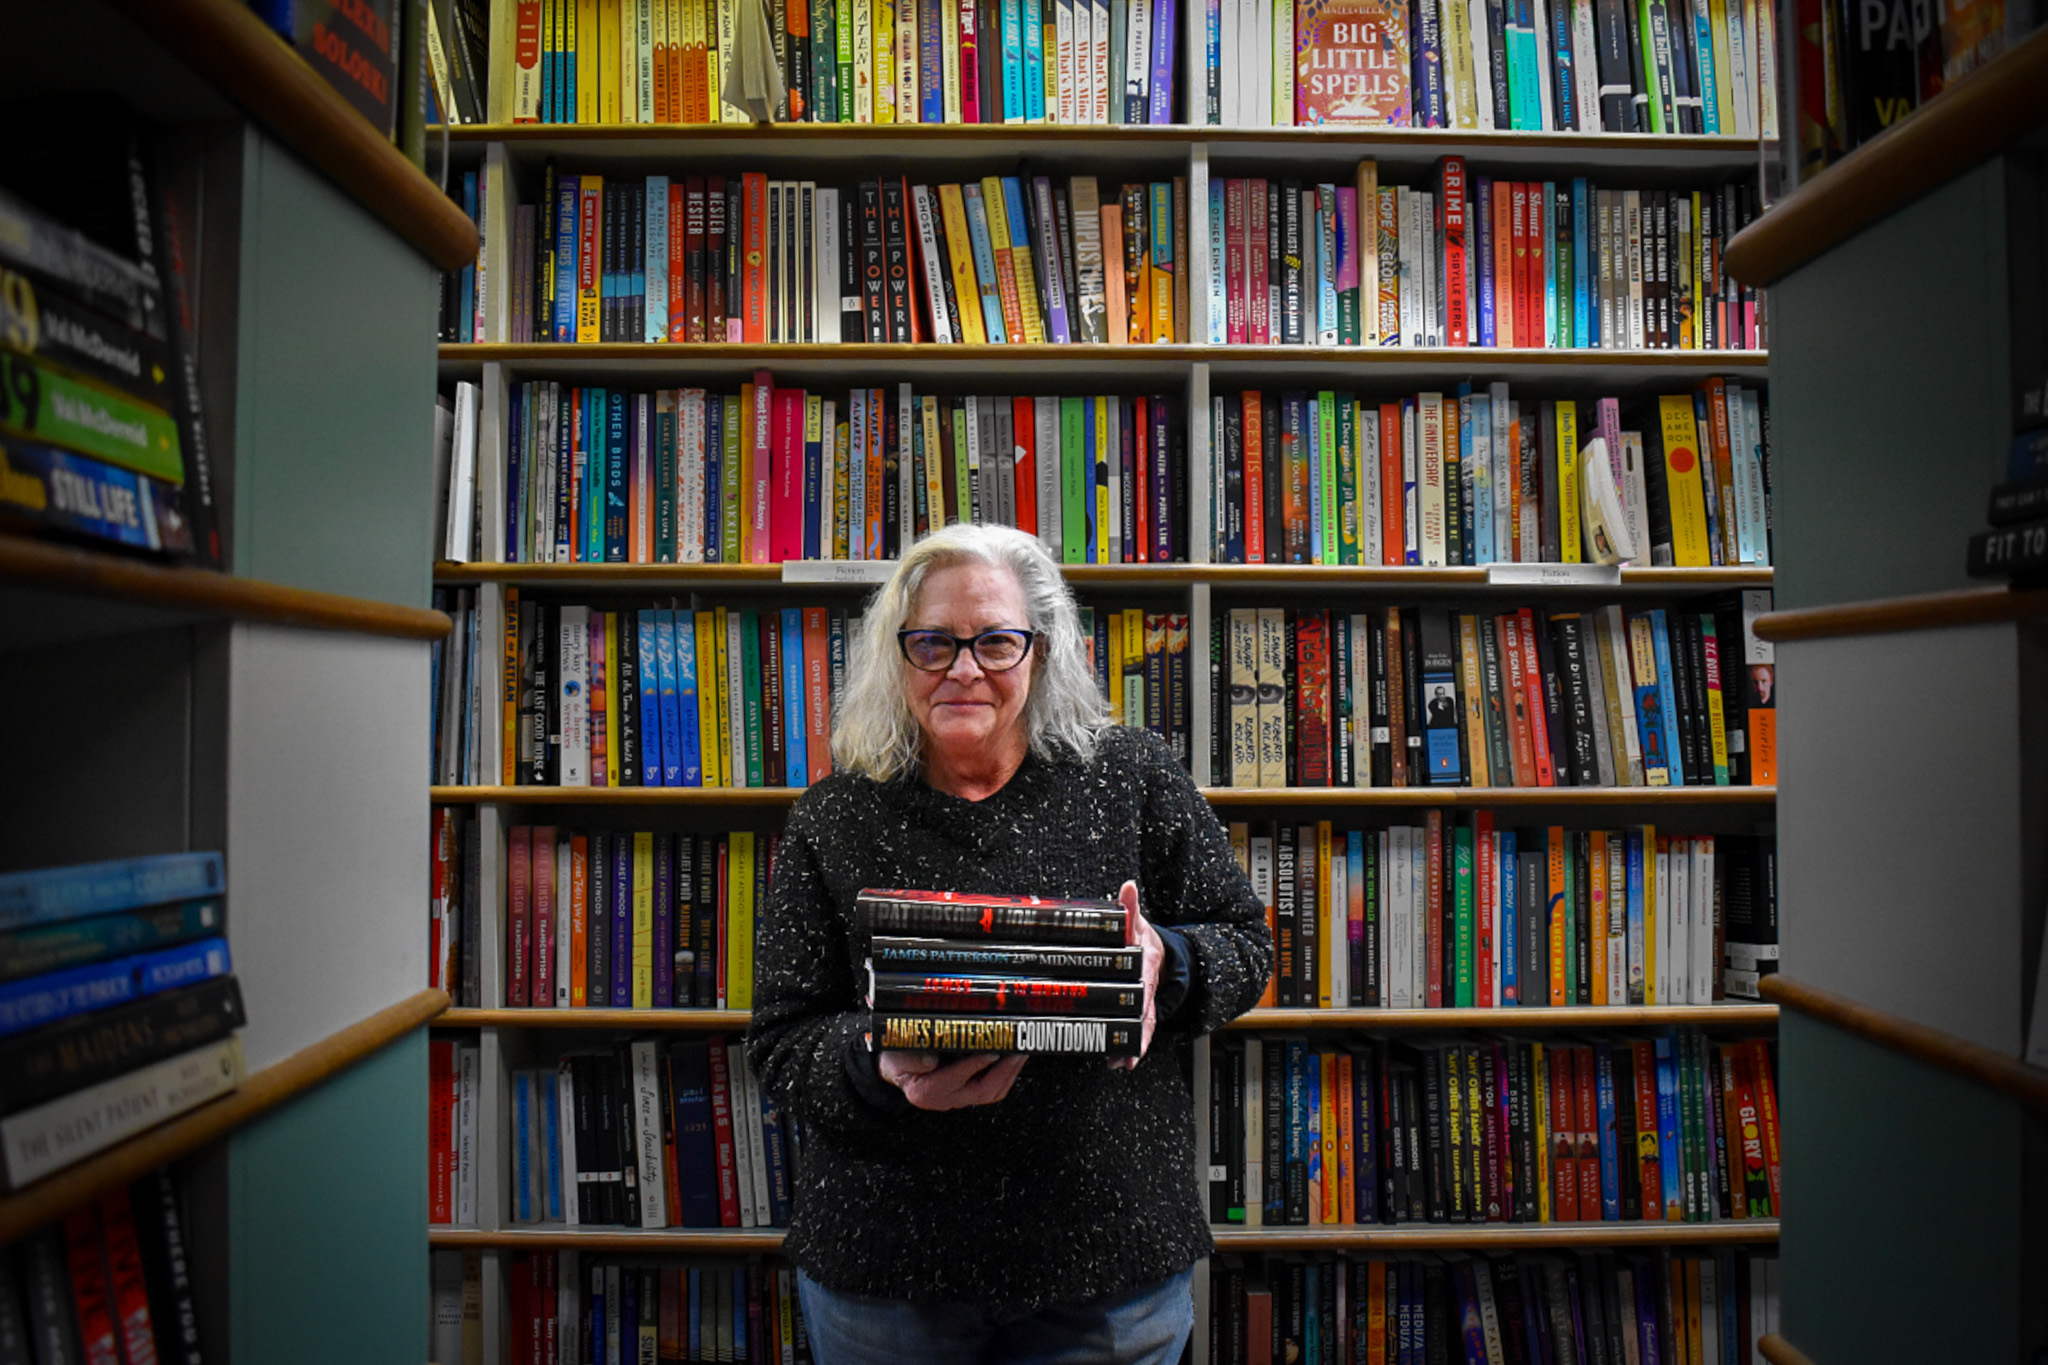 Suzanne Gleeson of Prairie Lights Books poses with some of author James Patterson's books. Ms. Gleeson was one of six Iowan recipients of Mr. Patterson's Holiday Bookstore Bonus Program.